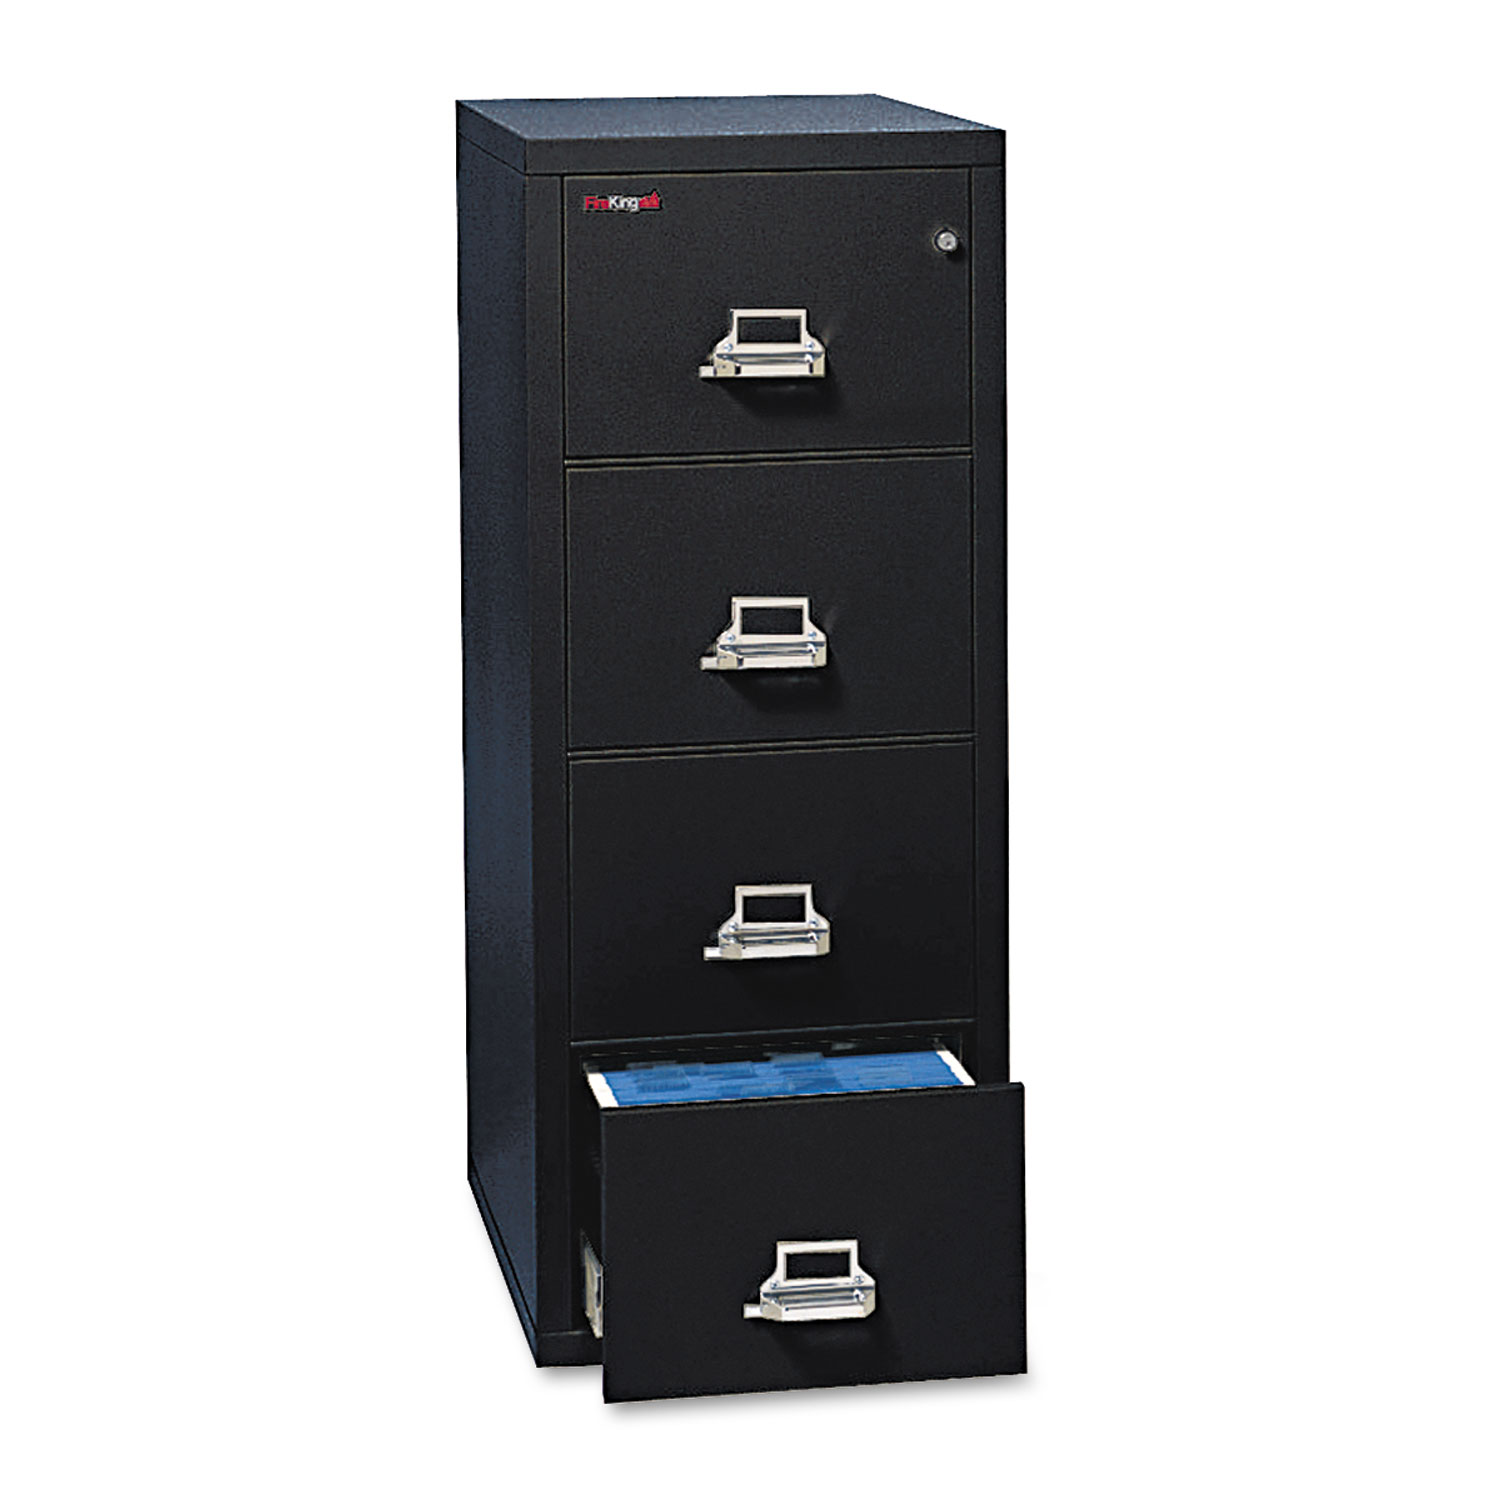 Four-Drawer Vertical File, 20 13/16w x 25d, UL 350 for Fire, Legal, Black